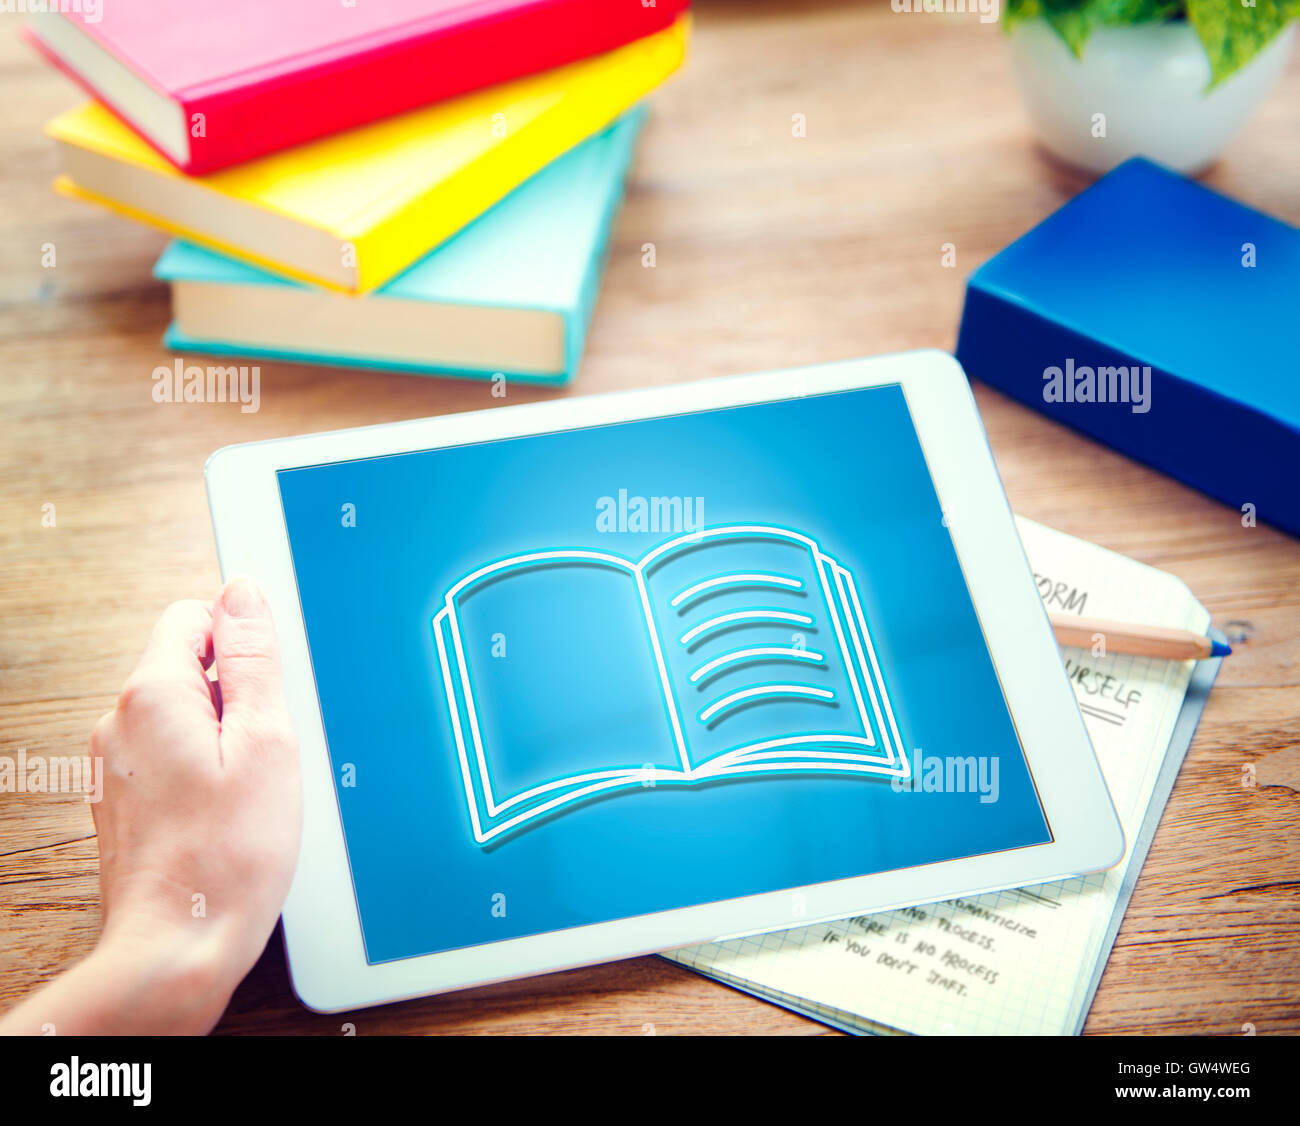 Digital Device Display Network Social Technology Concept Stock Photo